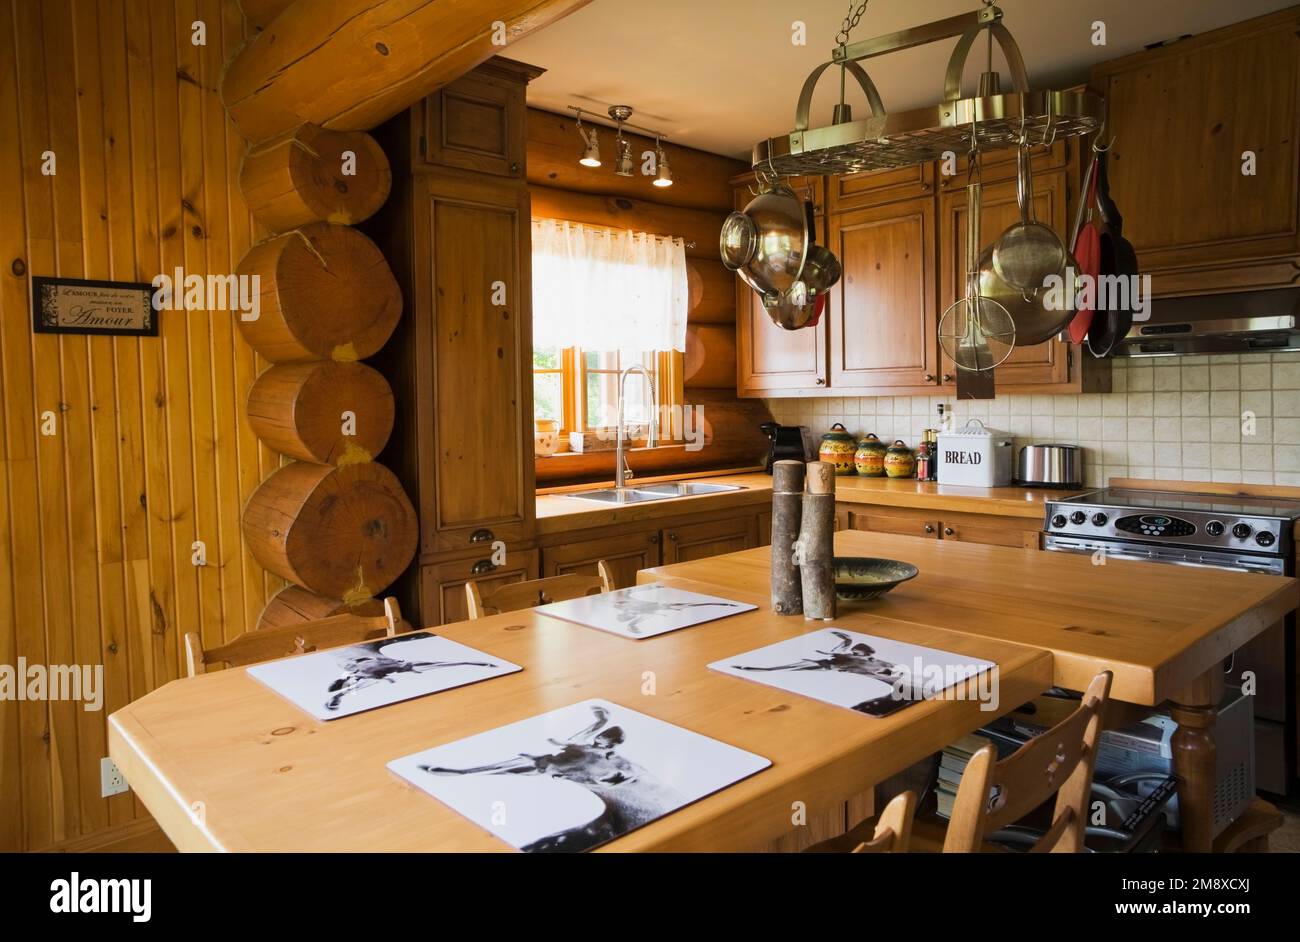 Pine wood cabinets, dining table and island in kitchen inside Scandinavian cottage style log home. Stock Photo